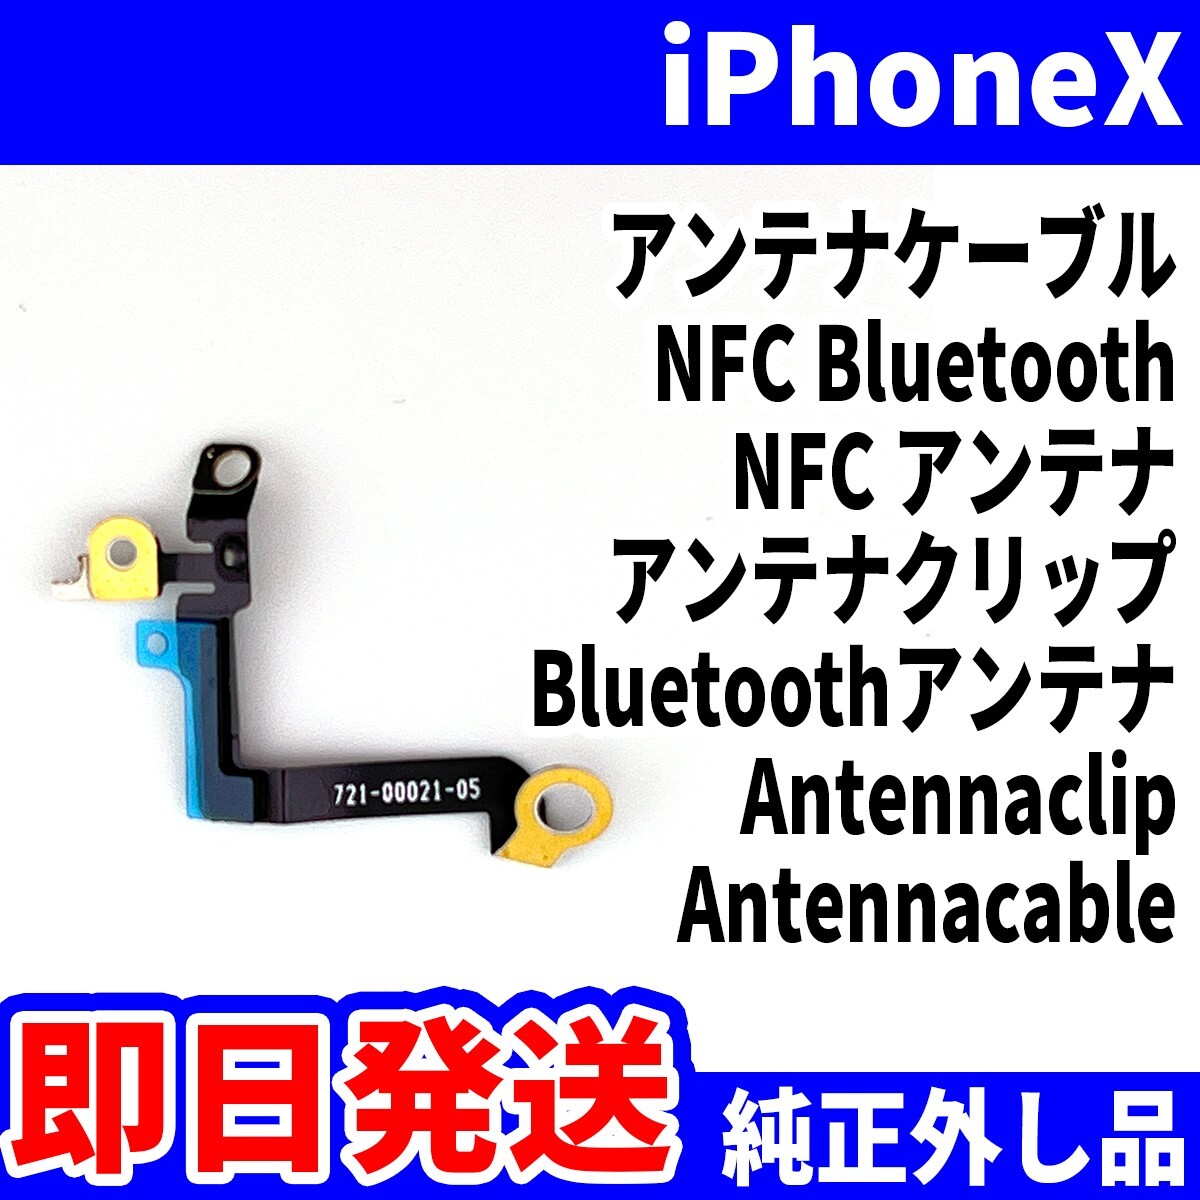  same day shipping! original remove goods! iPhoneX antenna cable IC card . not using NFC Bluetooth NFC antenna Bluetooth smartphone parts exchange for repair 